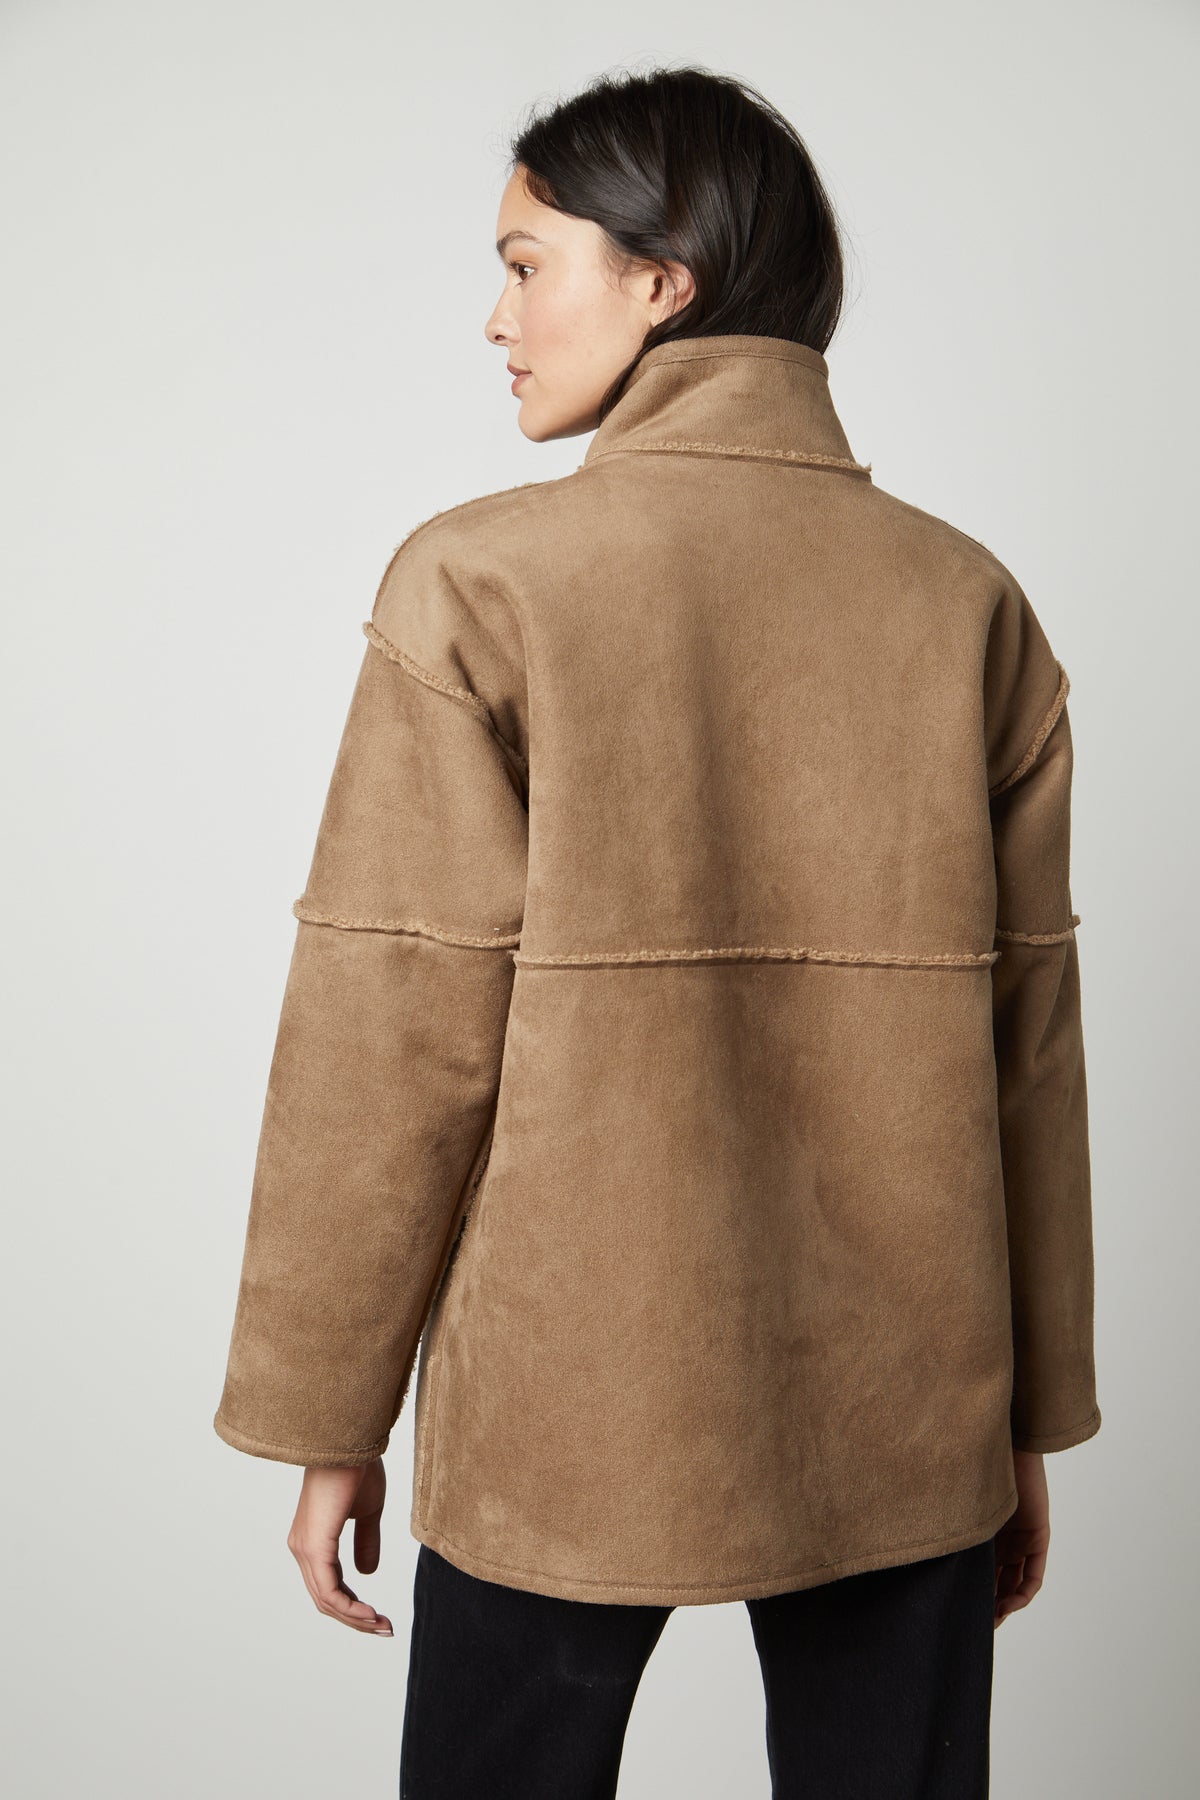 The back view of a woman wearing a Velvet by Graham & Spencer ALBANY LUX SHERPA REVERSIBLE JACKET.-35782611763393